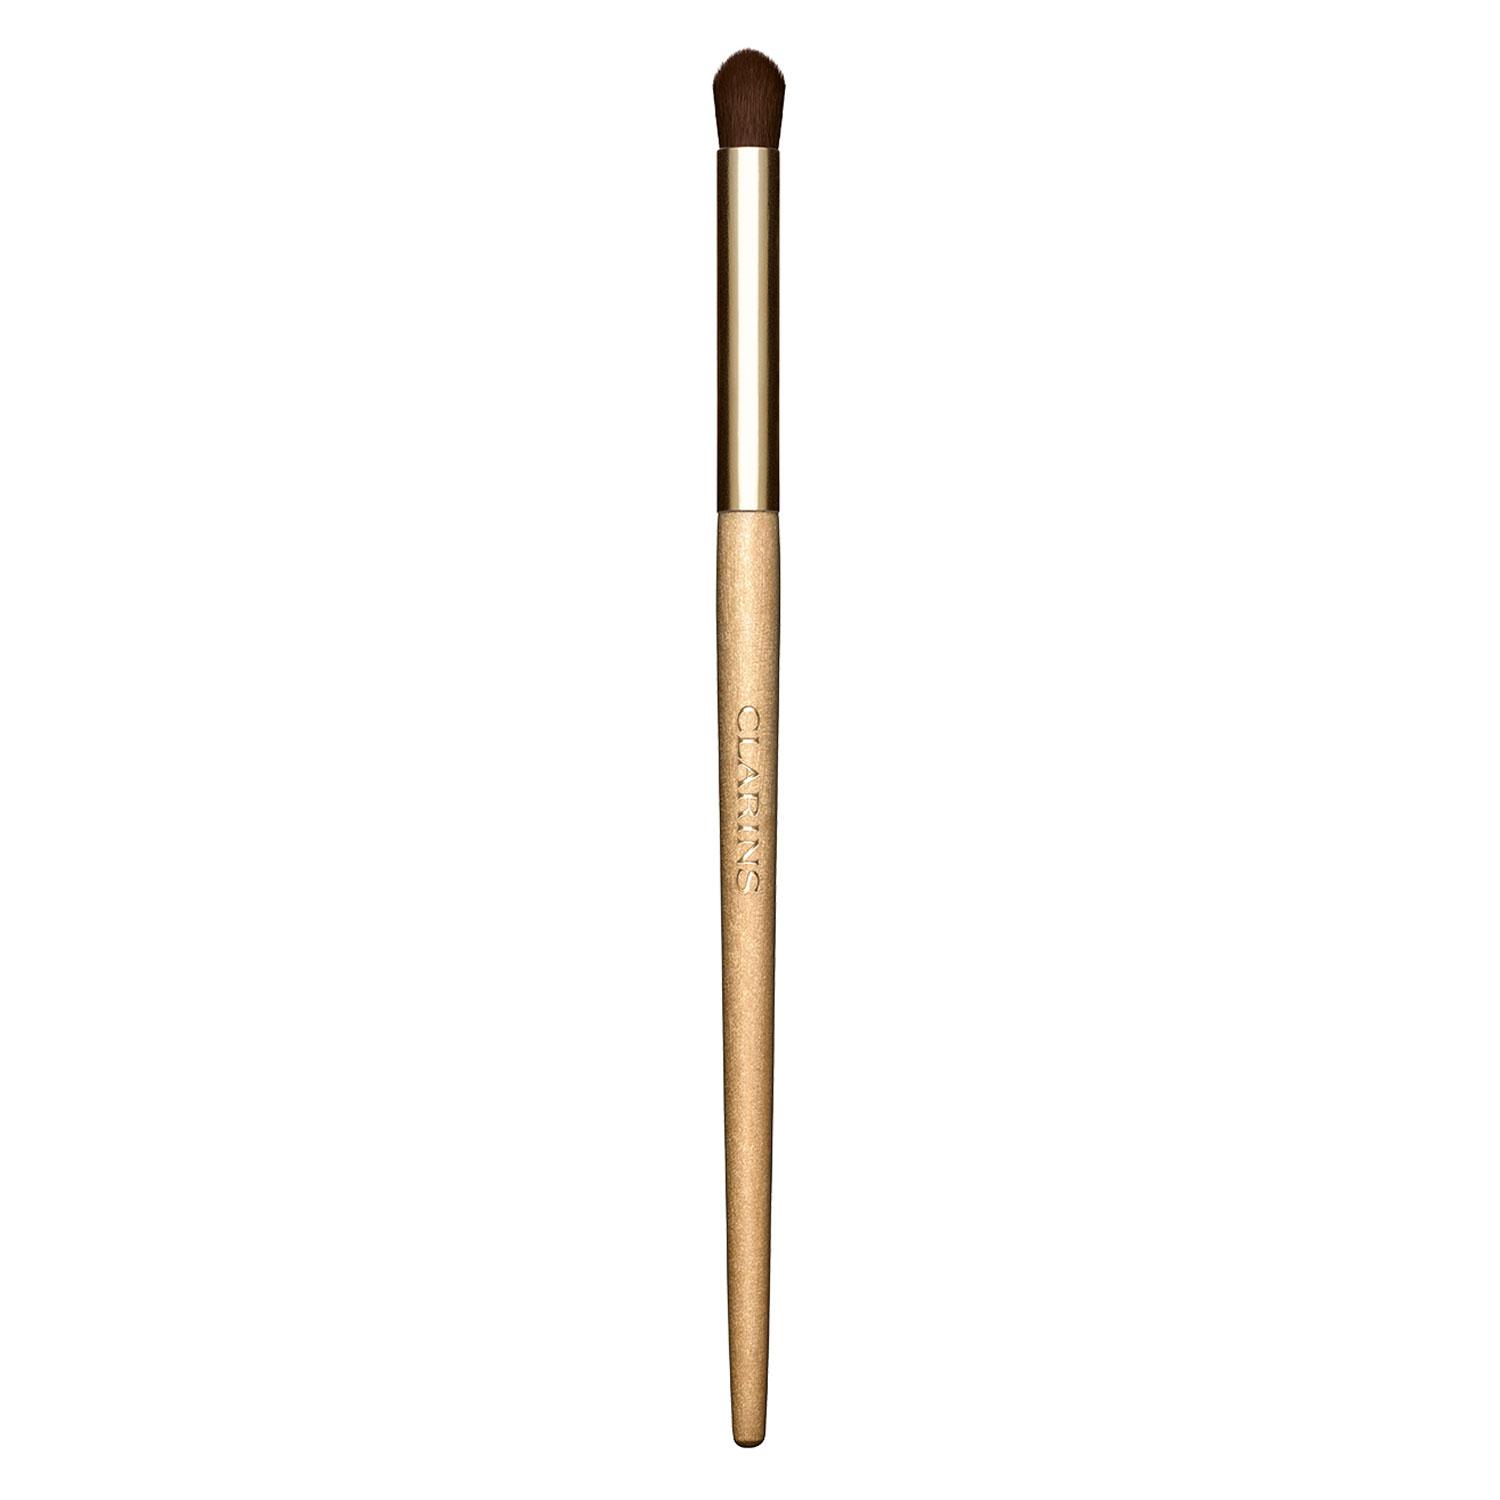 Clarins Tools - Pinceau Fards a Paupieres